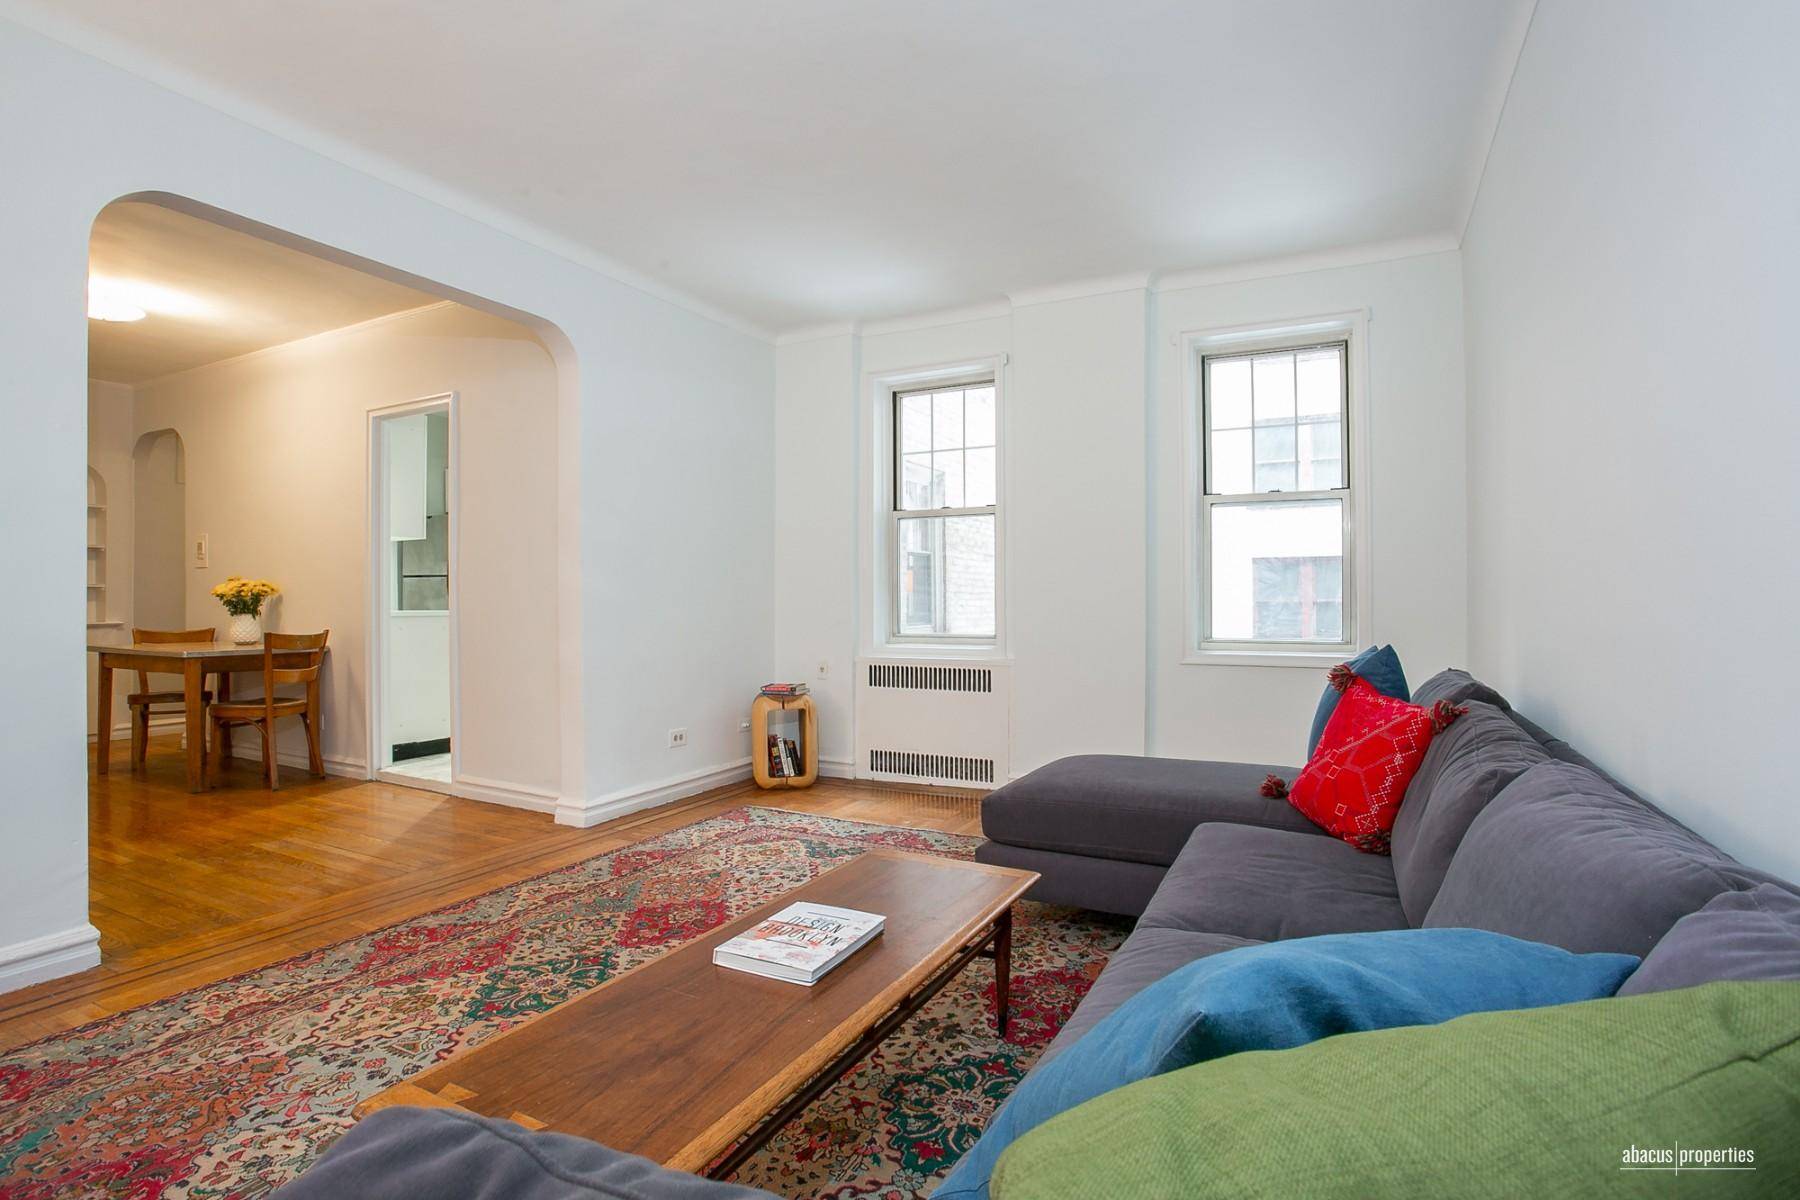 This spacious 1 bedroom has tons of prewar charm and an updated kitchen and bath.